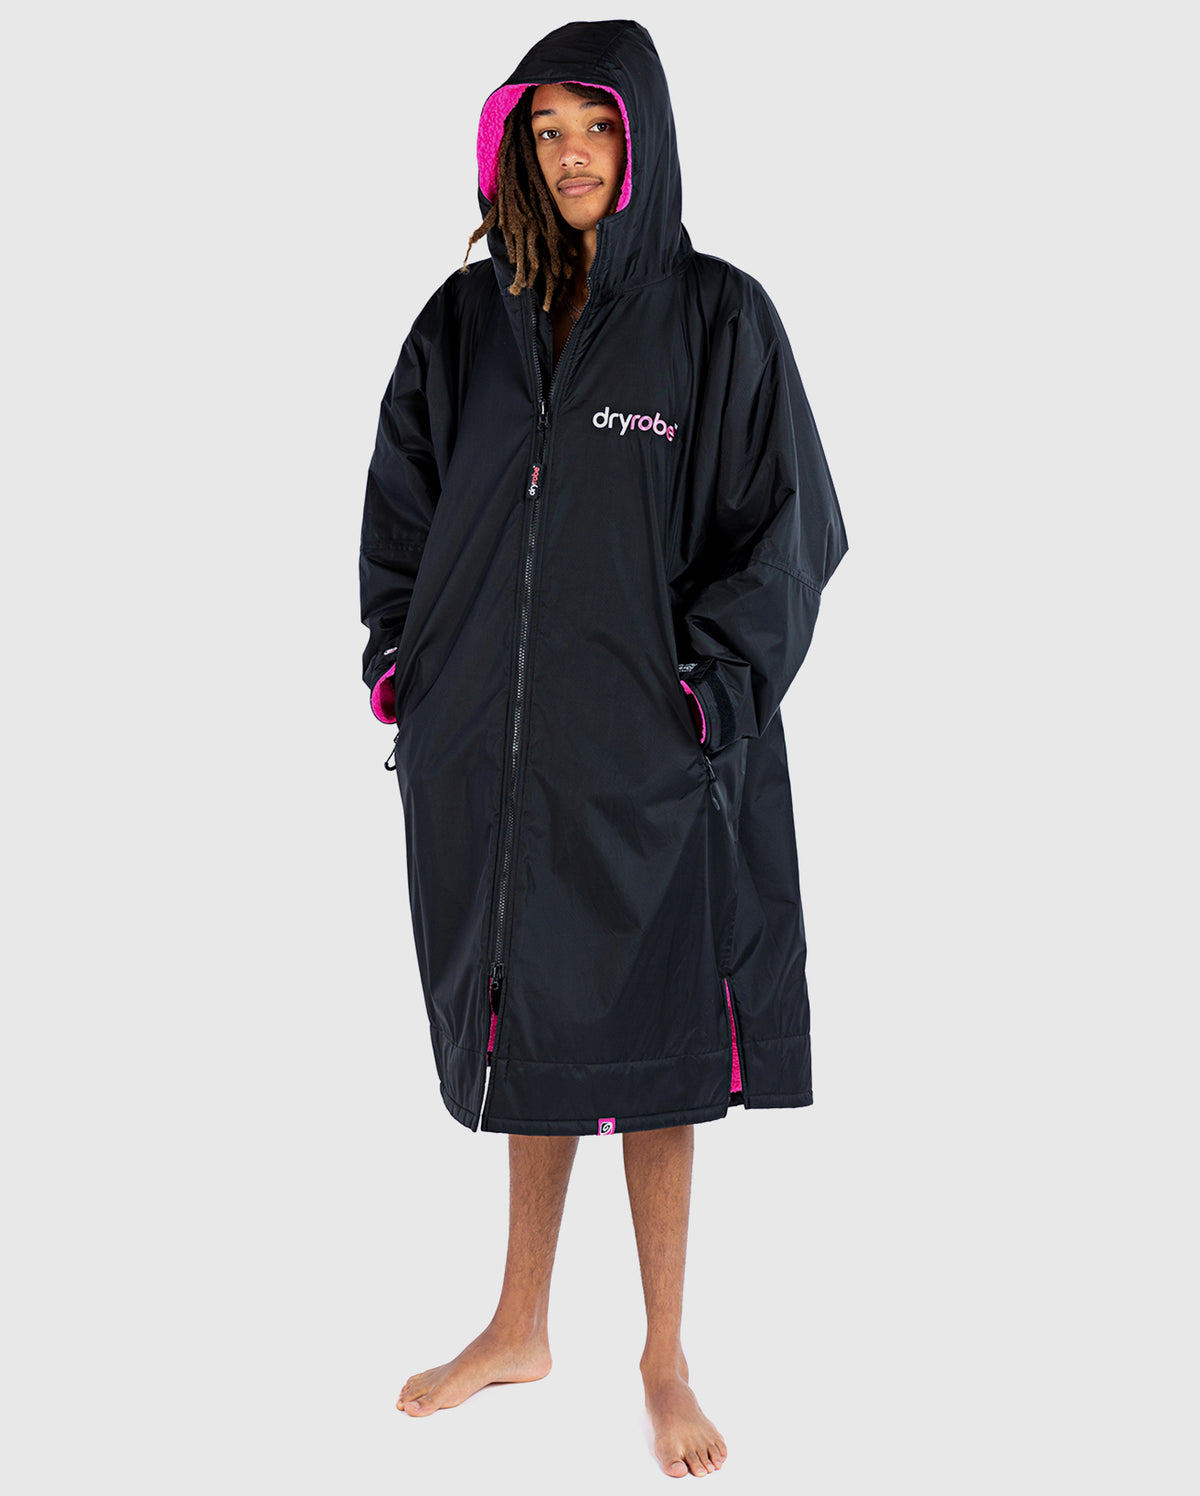 *MALE* wearing Black Pink dryrobe® Advance Long Sleeve with the hood up